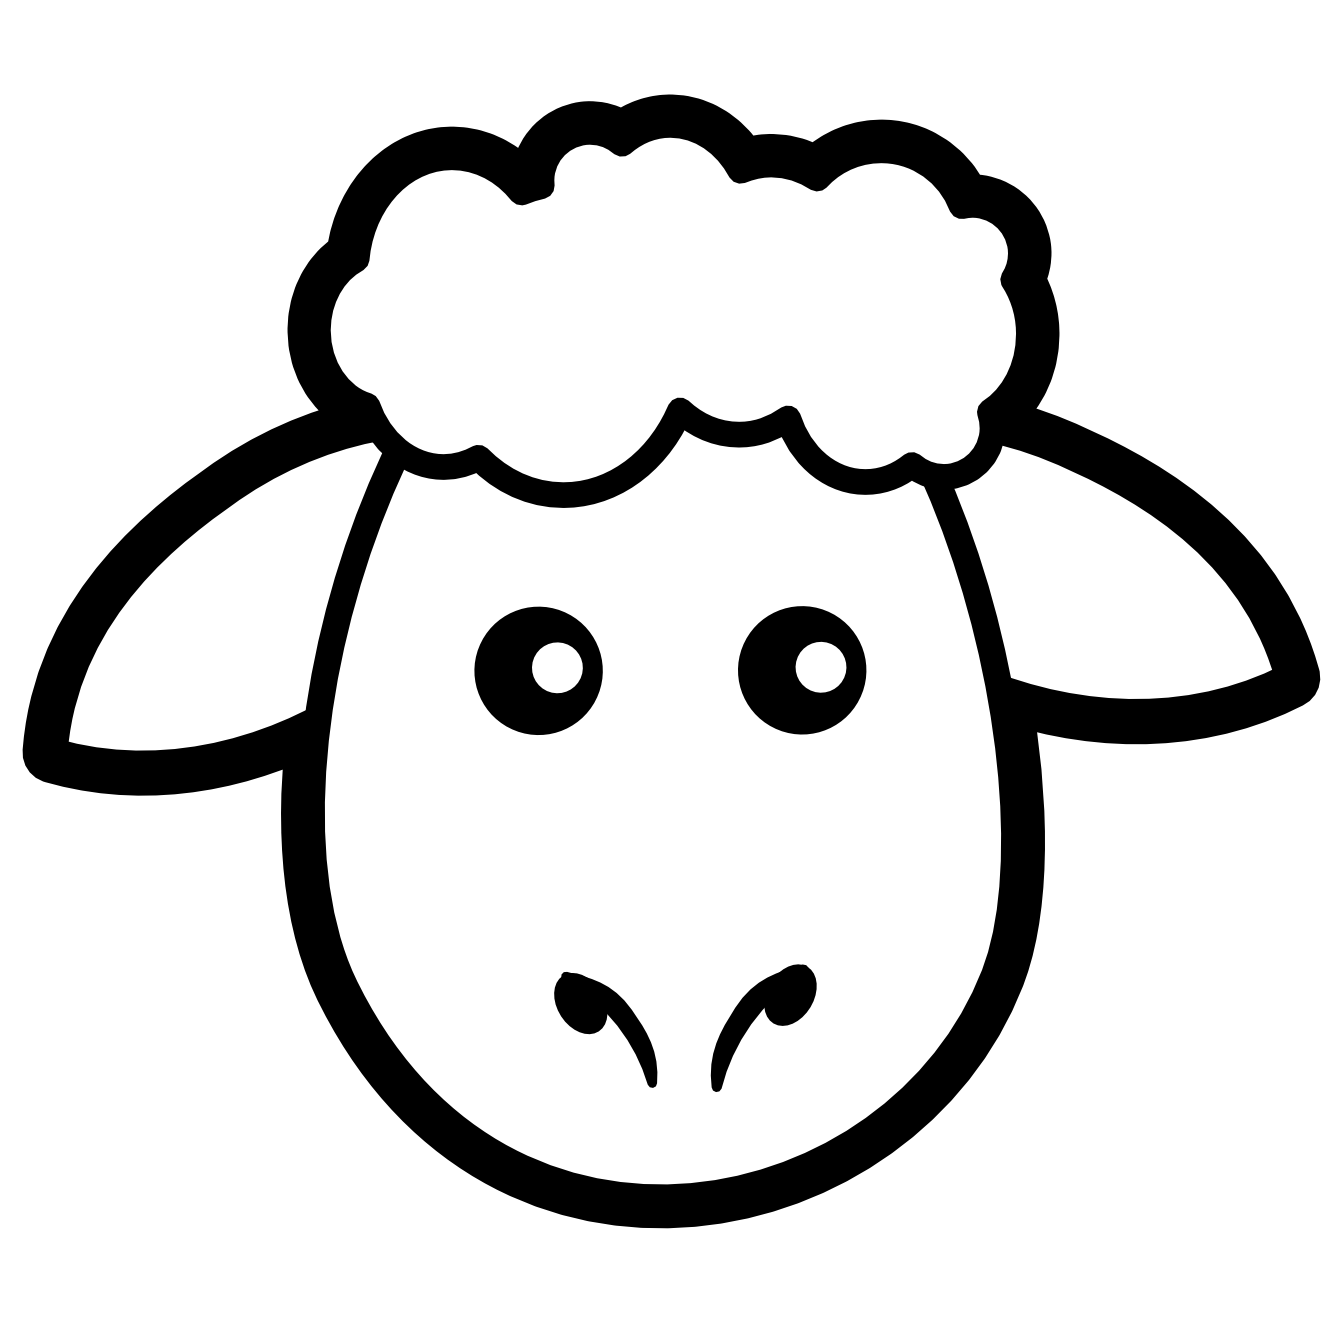 1000+ images about Lost Sheep & Good Shepherd | Coins ...